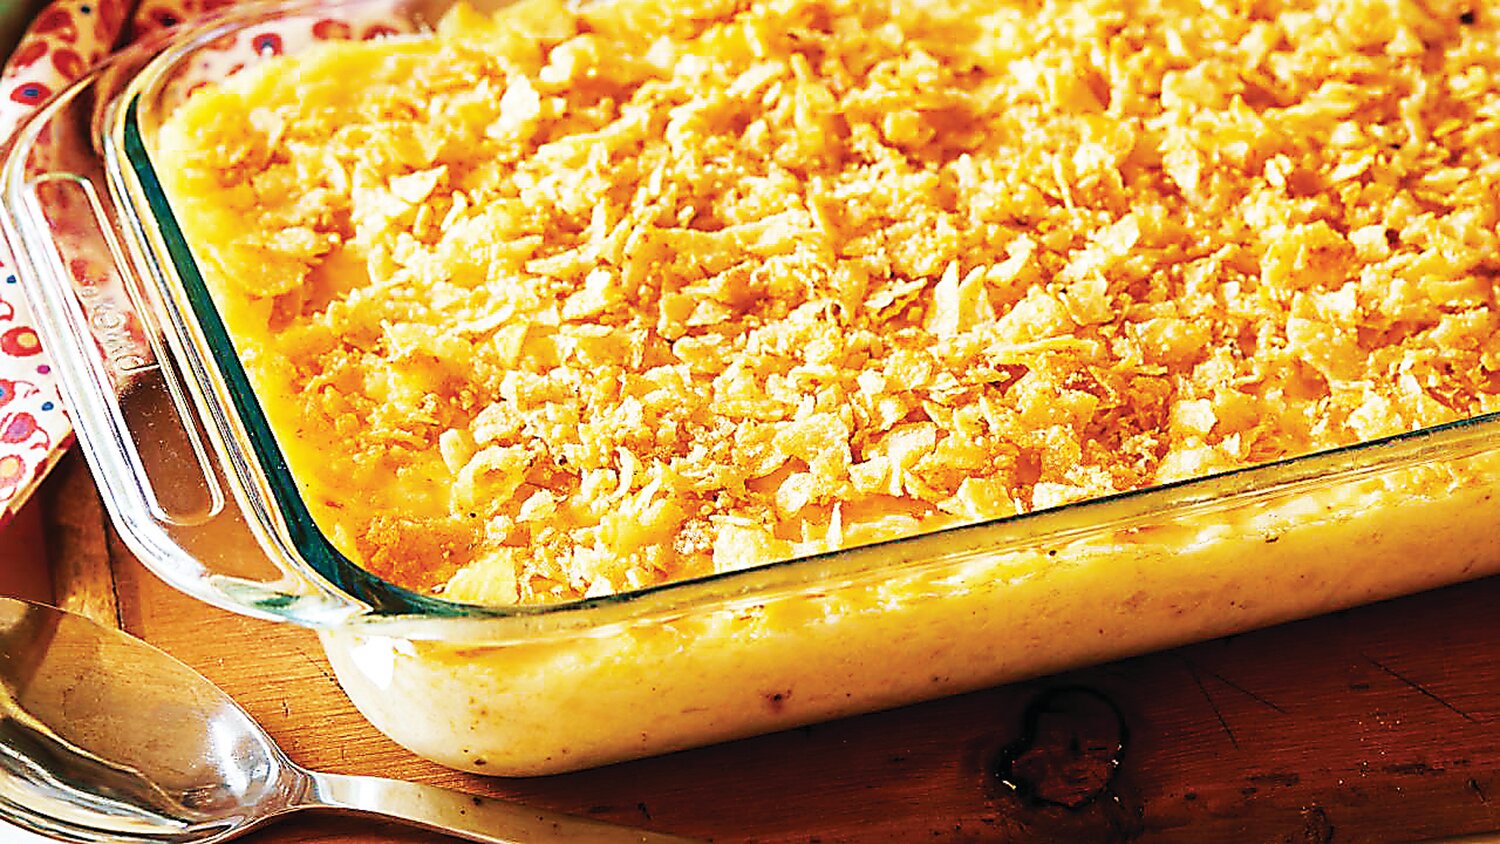 Funeral potatoes are popular in the Midwest, which is known for its many casserole dishes.